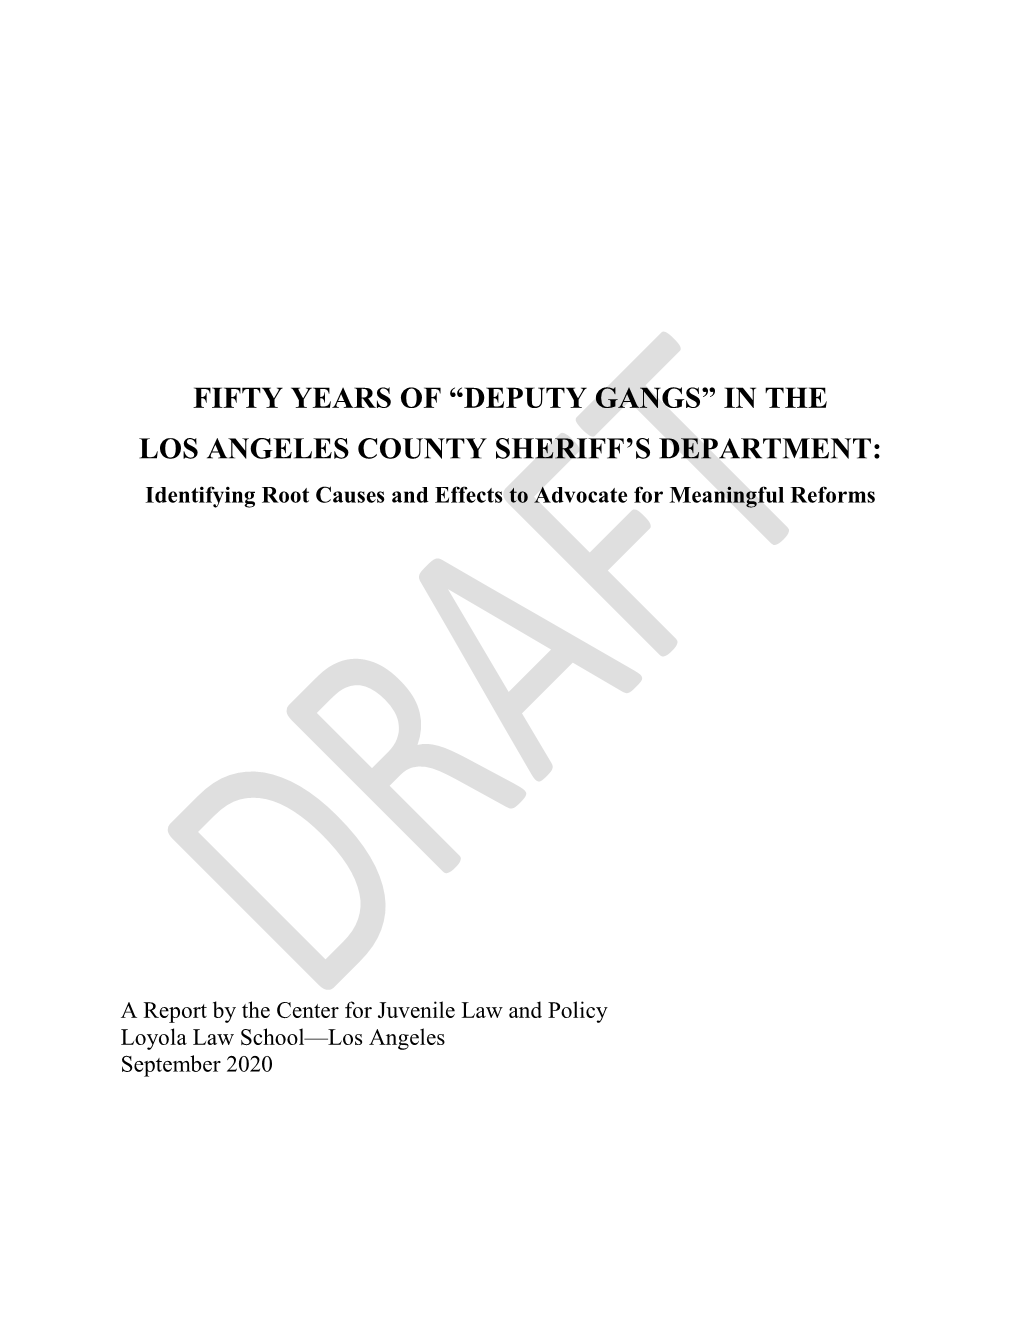 FIFTY YEARS of “DEPUTY GANGS” in the LOS ANGELES COUNTY SHERIFF’S DEPARTMENT: Identifying Root Causes and Effects to Advocate for Meaningful Reforms